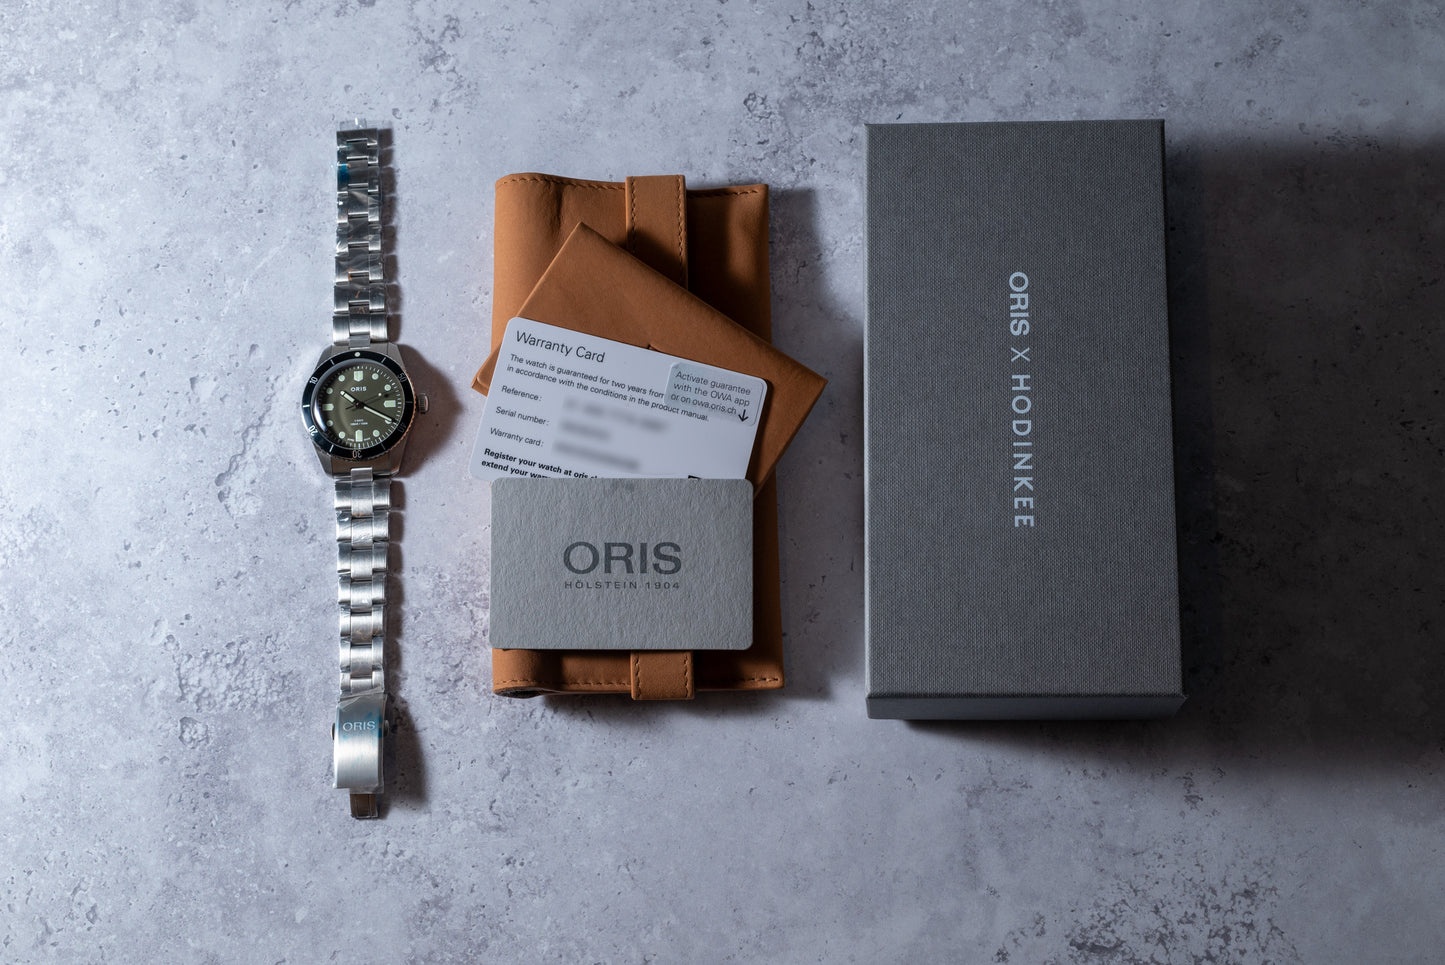 Oris Diver Sixty-Five Calibre 400 Limited Edition for HODINKEE